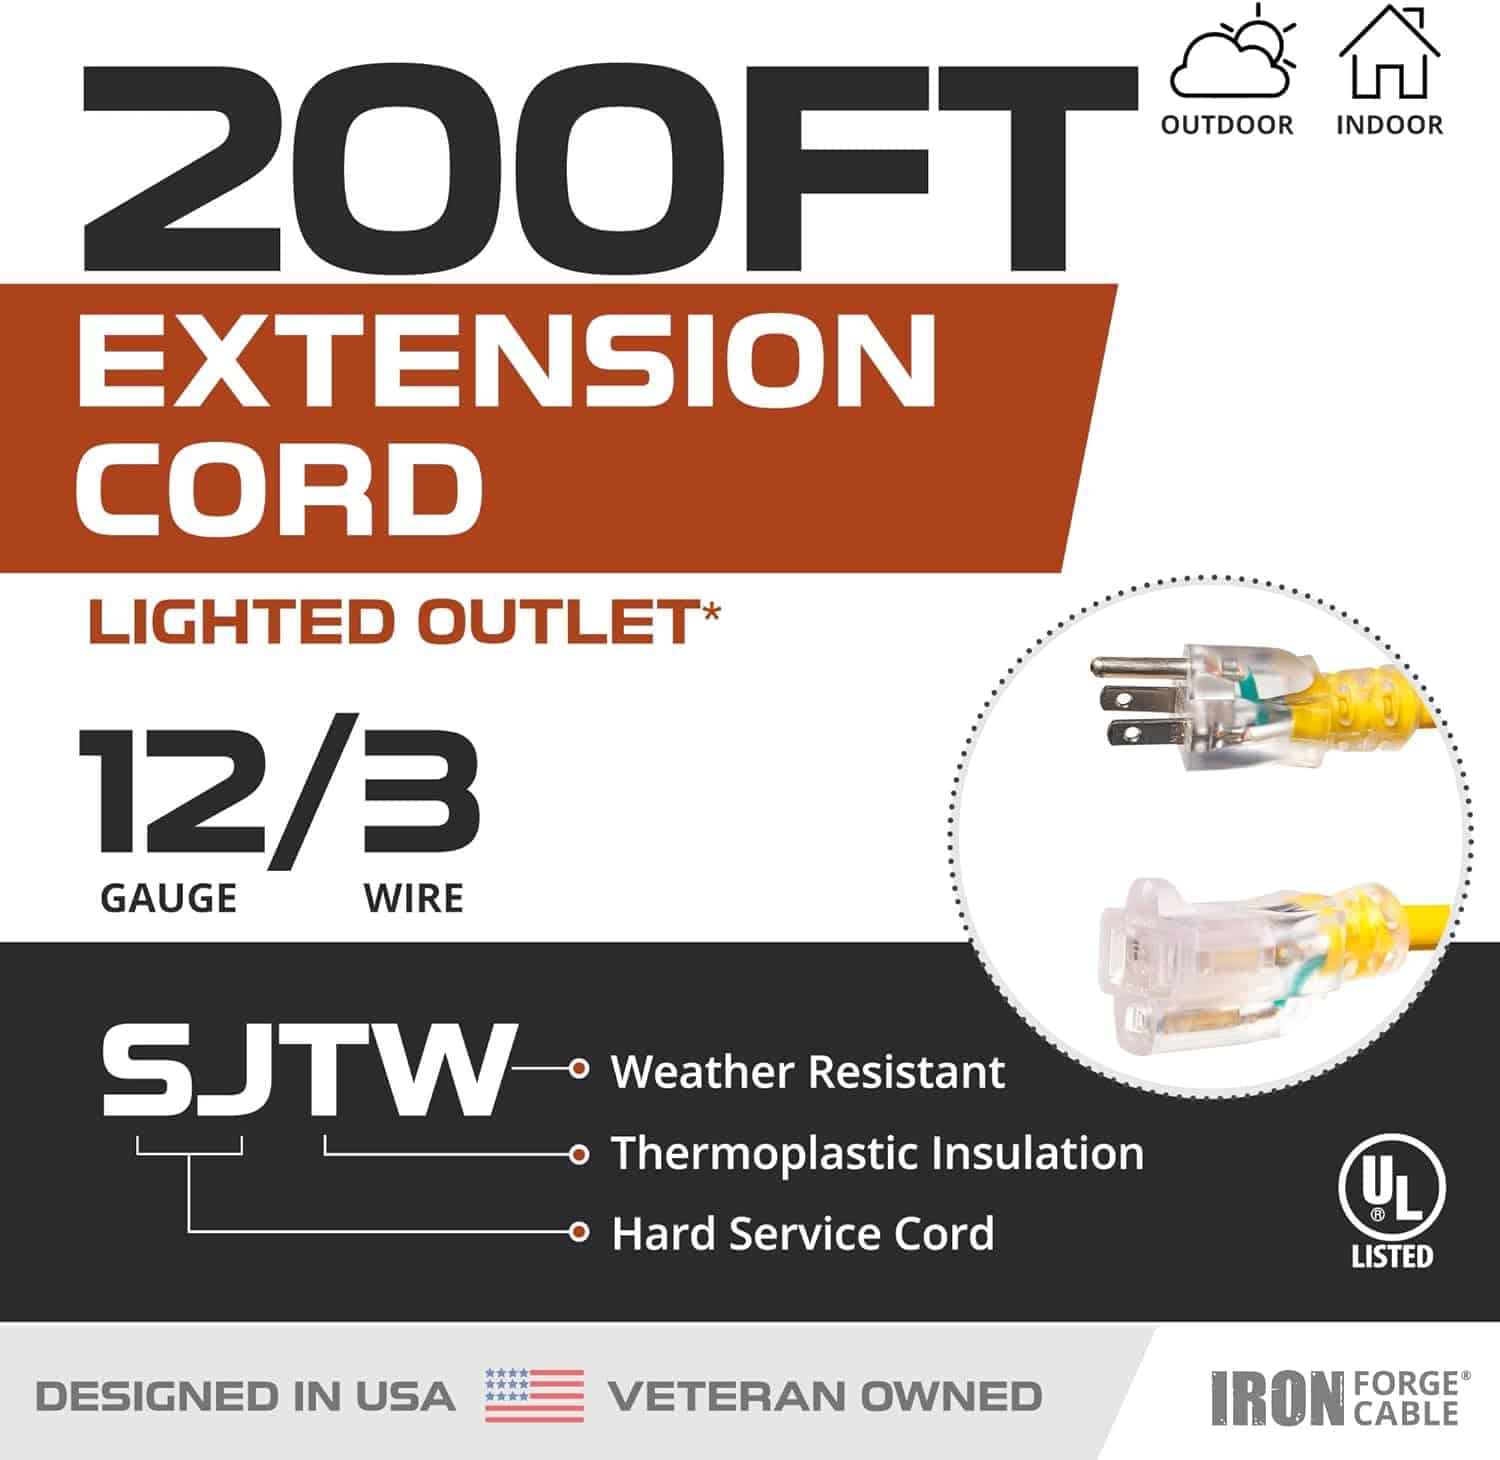 Iron-Forge-Heavy-Duty-Extension-Cord-200-ft-Extension-Cord-Outdoor-with-3-Prong-Lighted-End-12-Gauge-Extension-Cord-200-Construction-Grade-Great-for-Major-Appliances-Generator-US-Veteran-Owned